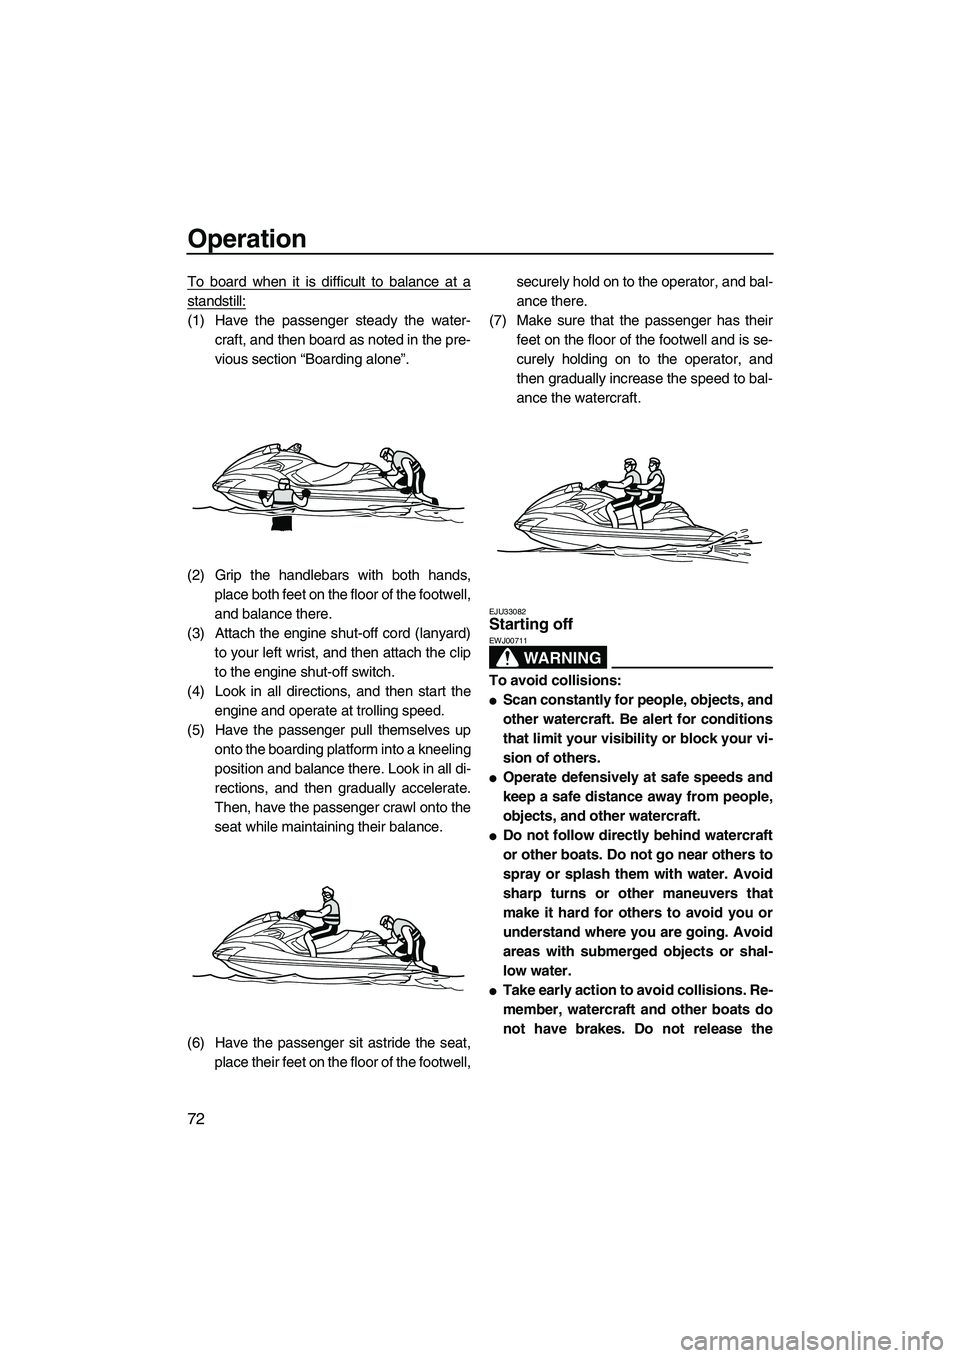 YAMAHA FZR 2012  Owners Manual Operation
72
To board when it is difficult to balance at a
standstill:
(1) Have the passenger steady the water-
craft, and then board as noted in the pre-
vious section “Boarding alone”.
(2) Grip 